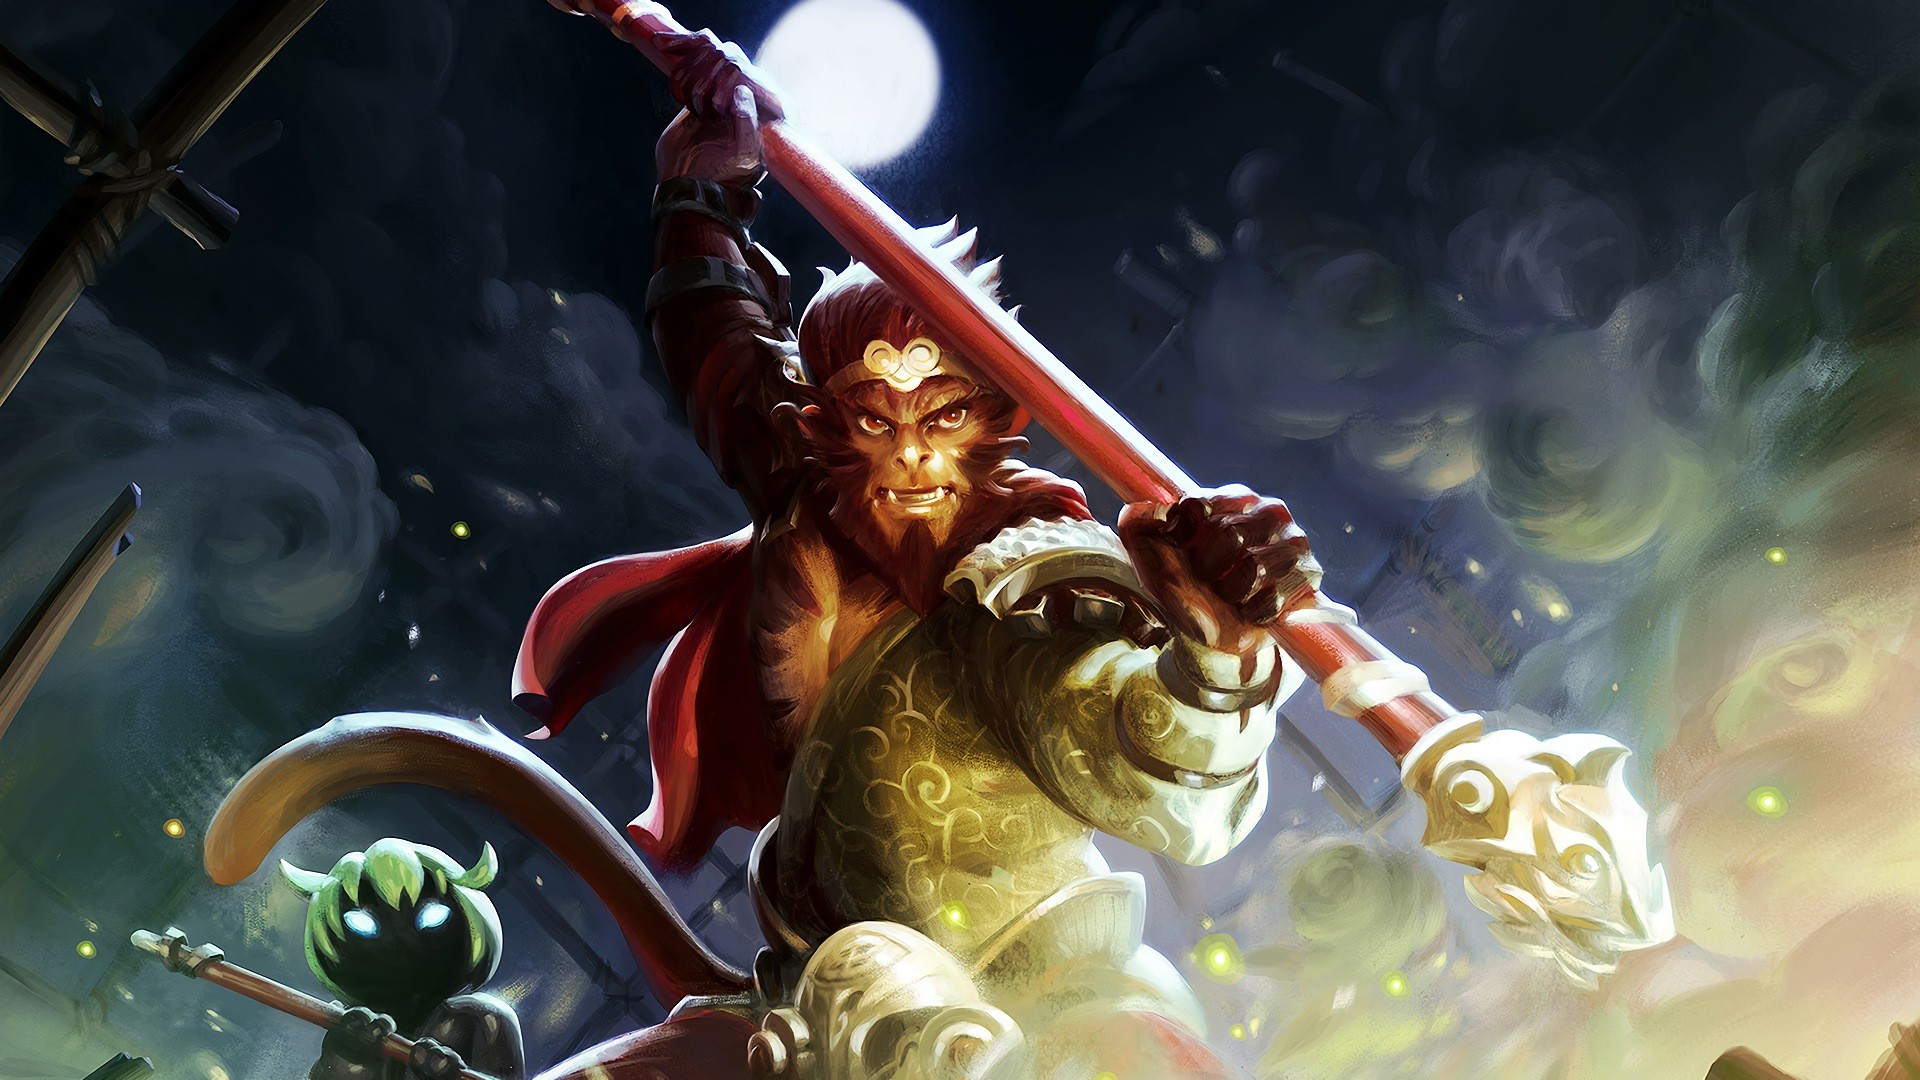 Download hd wallpapers of 478576-Dota_2, Defense_of_the_Ancients, Dota, Ste...